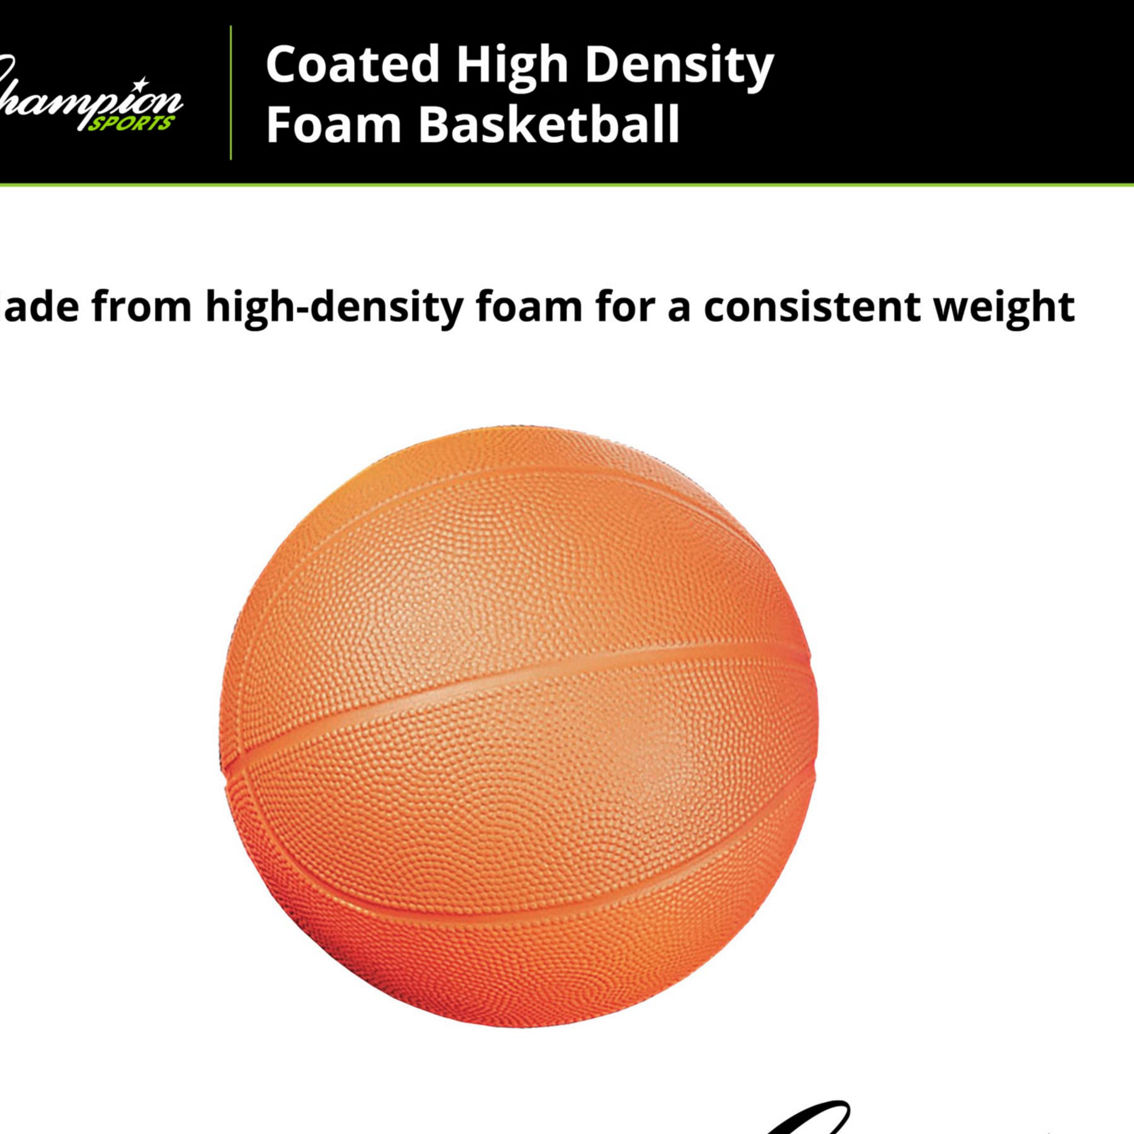 Champion Sports Coated High Density Foam Basketball, Size 3, Pack of 2 - Image 4 of 5